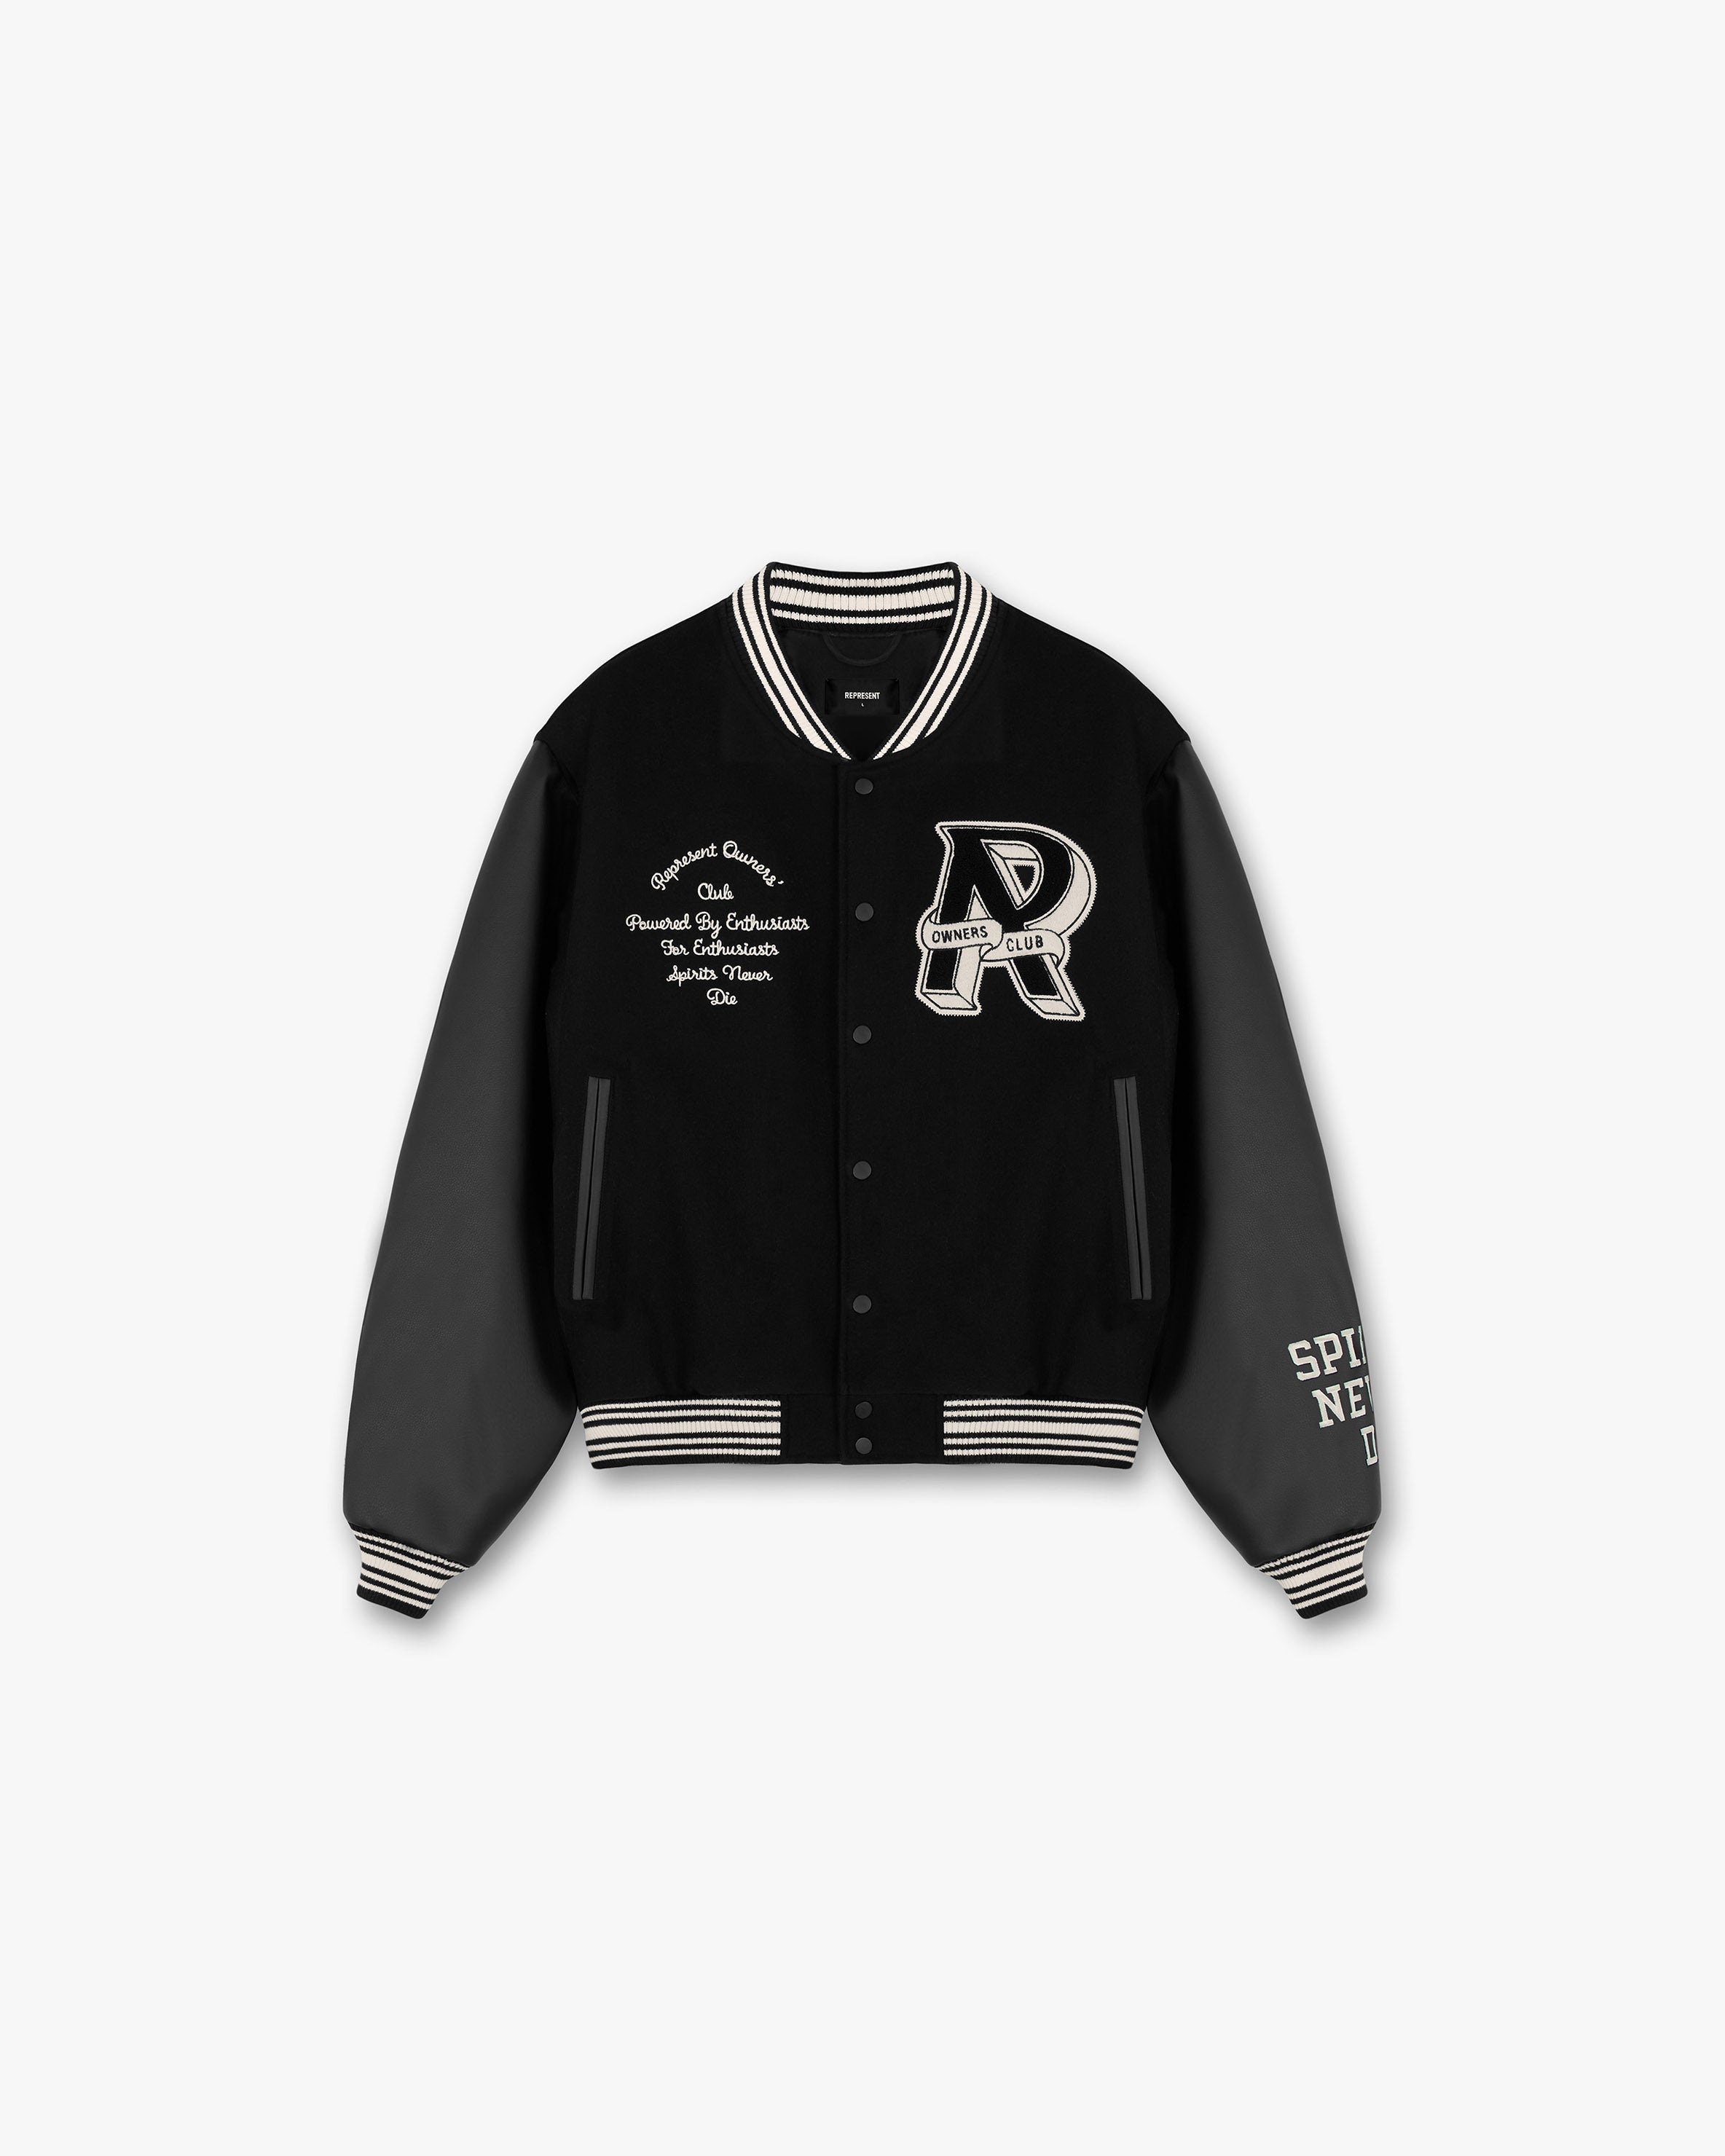 Represent Owners Club Varsity Jacket | Black Outerwear Owners Club | Represent Clo